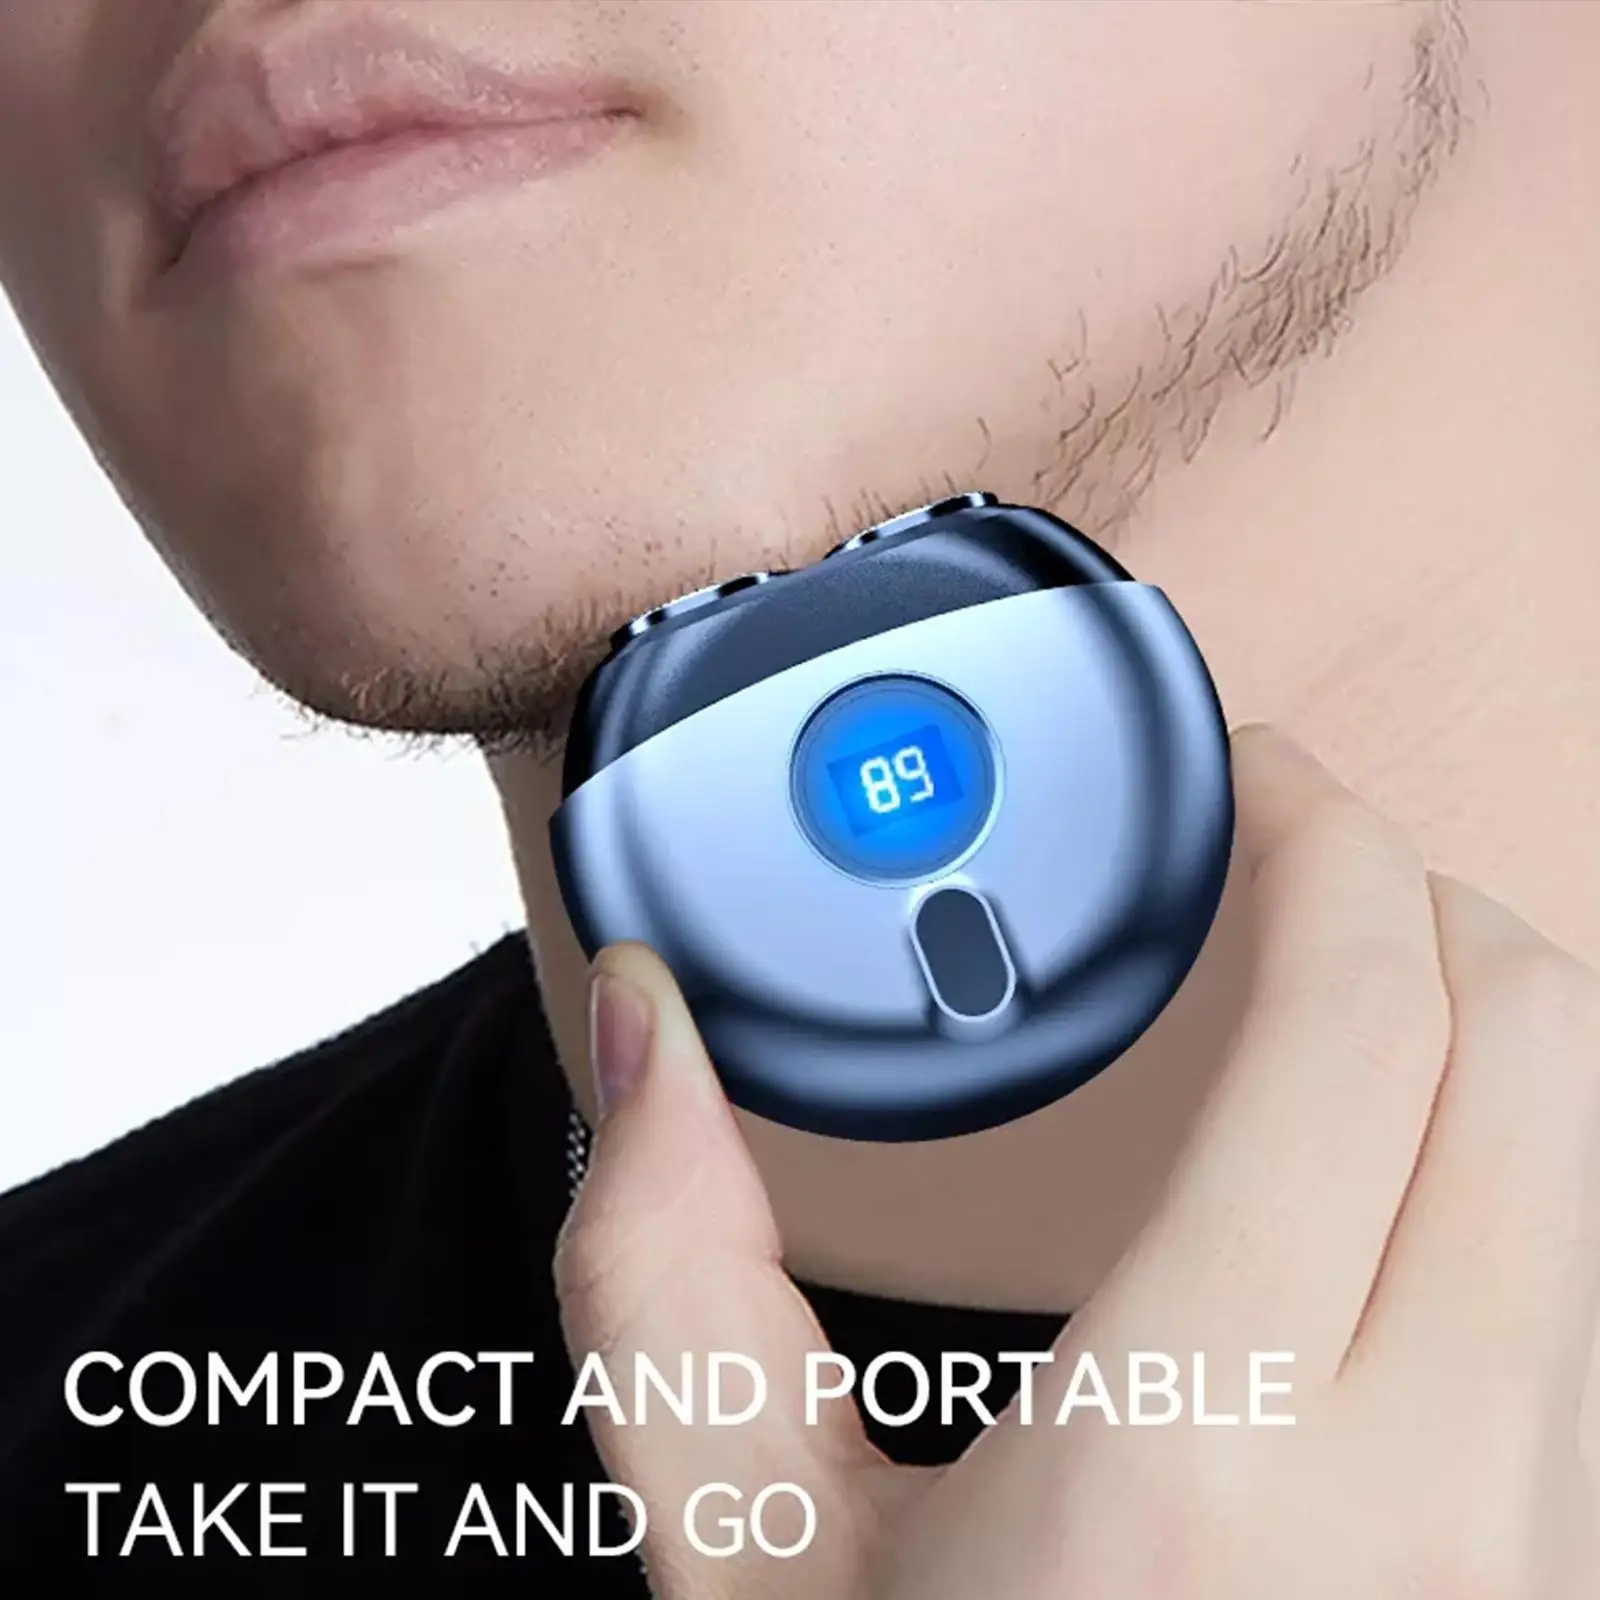 

Mini Razor Portable Rechargeable Electric Fly Saucer Razor Waterproof Barber Rotary Shaver Beard Shavers For Men Tavel Trimmer